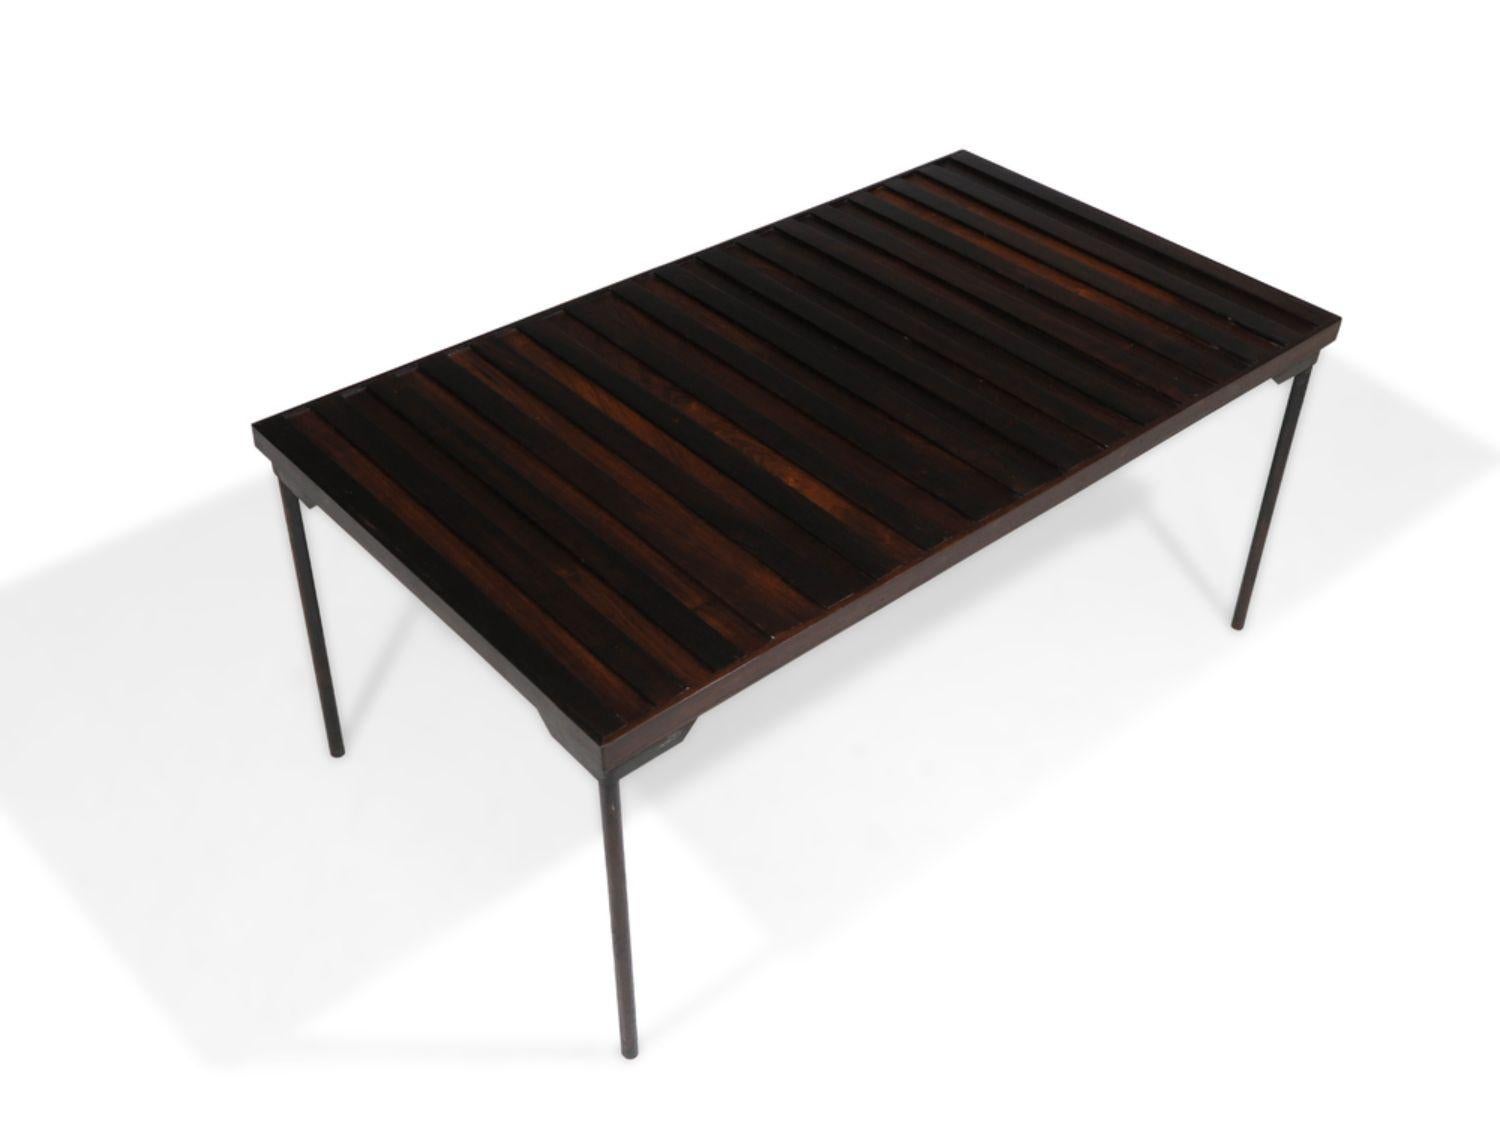 1960's Brazil Modern rosewood coffee table crafted of rosewood slats assembled to a wrought iron frame. The coffee table is in good condition with minor signs of age and use.
Measurements 
W 38.75'' x D 21.75'' x H 17.25''